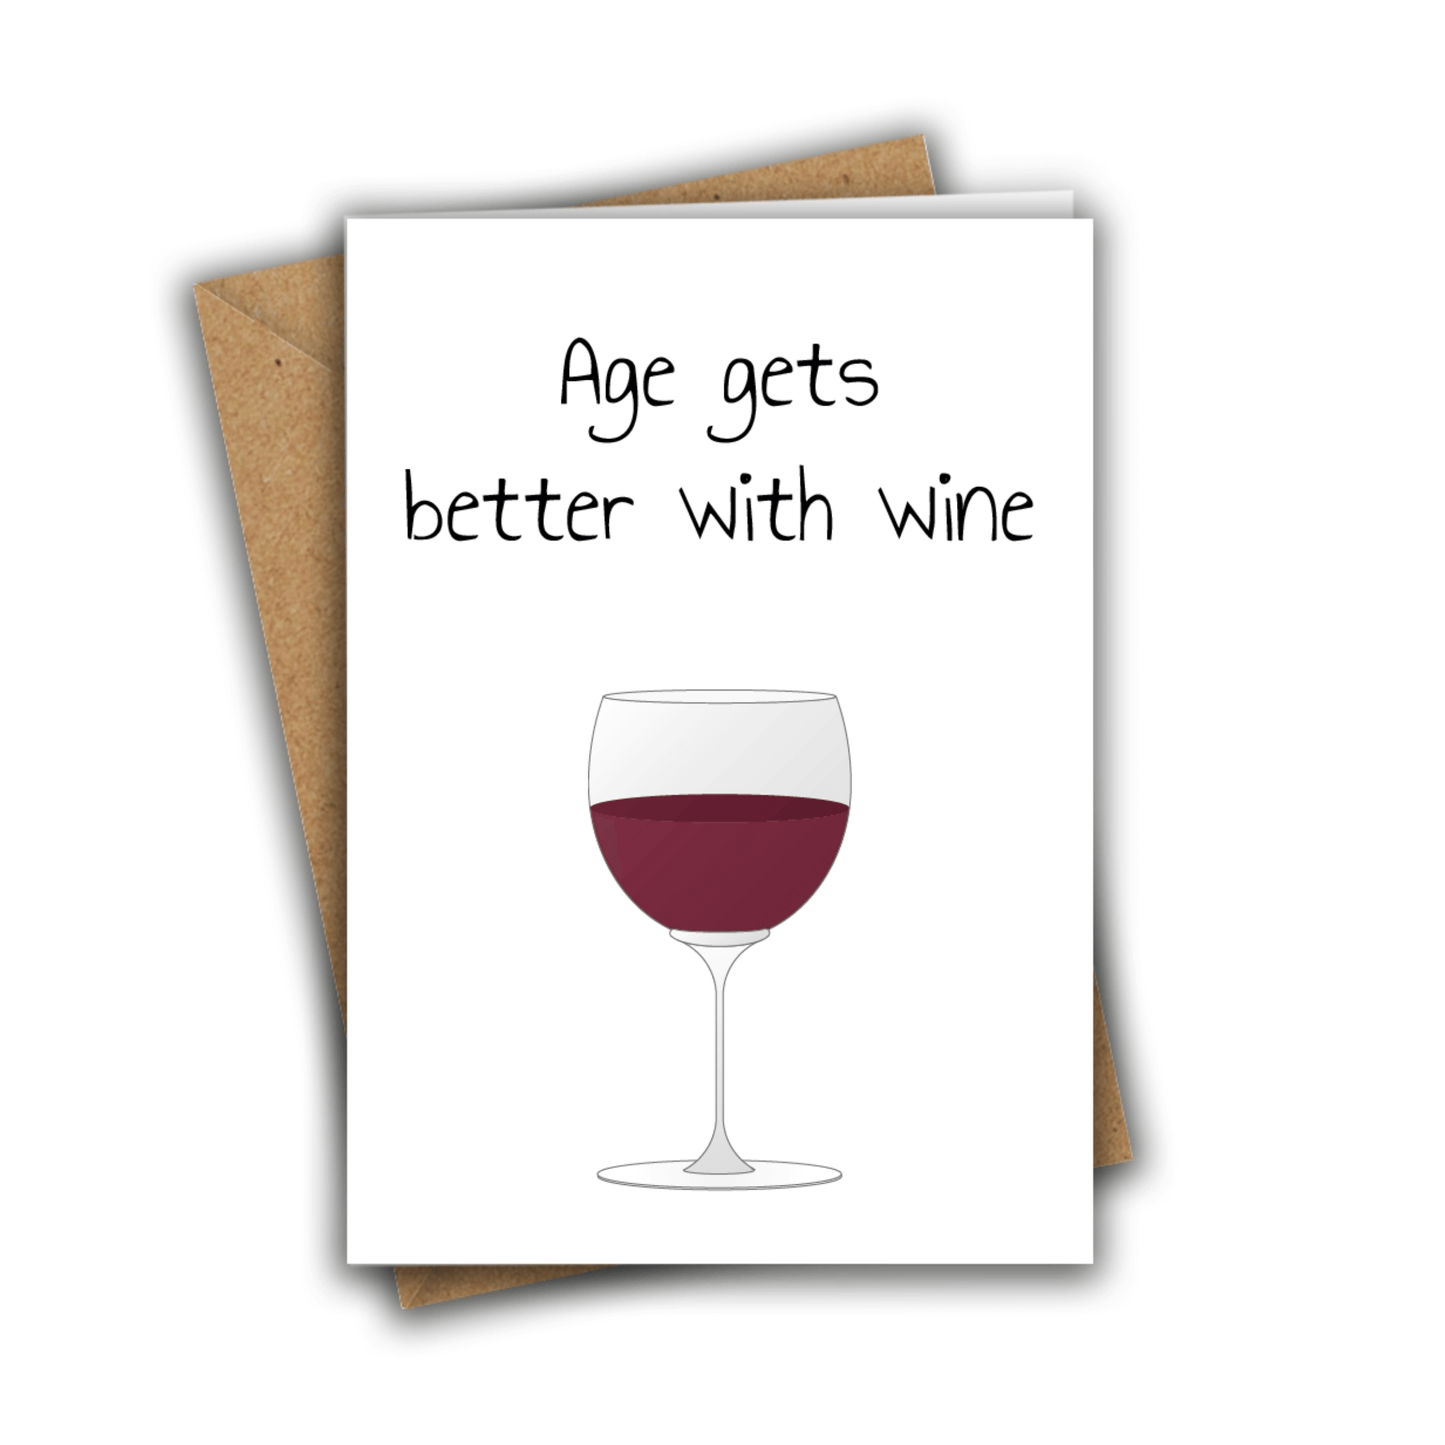 Little Kraken's Age Gets Better With Wine, Birthday Cards for £3.50 each